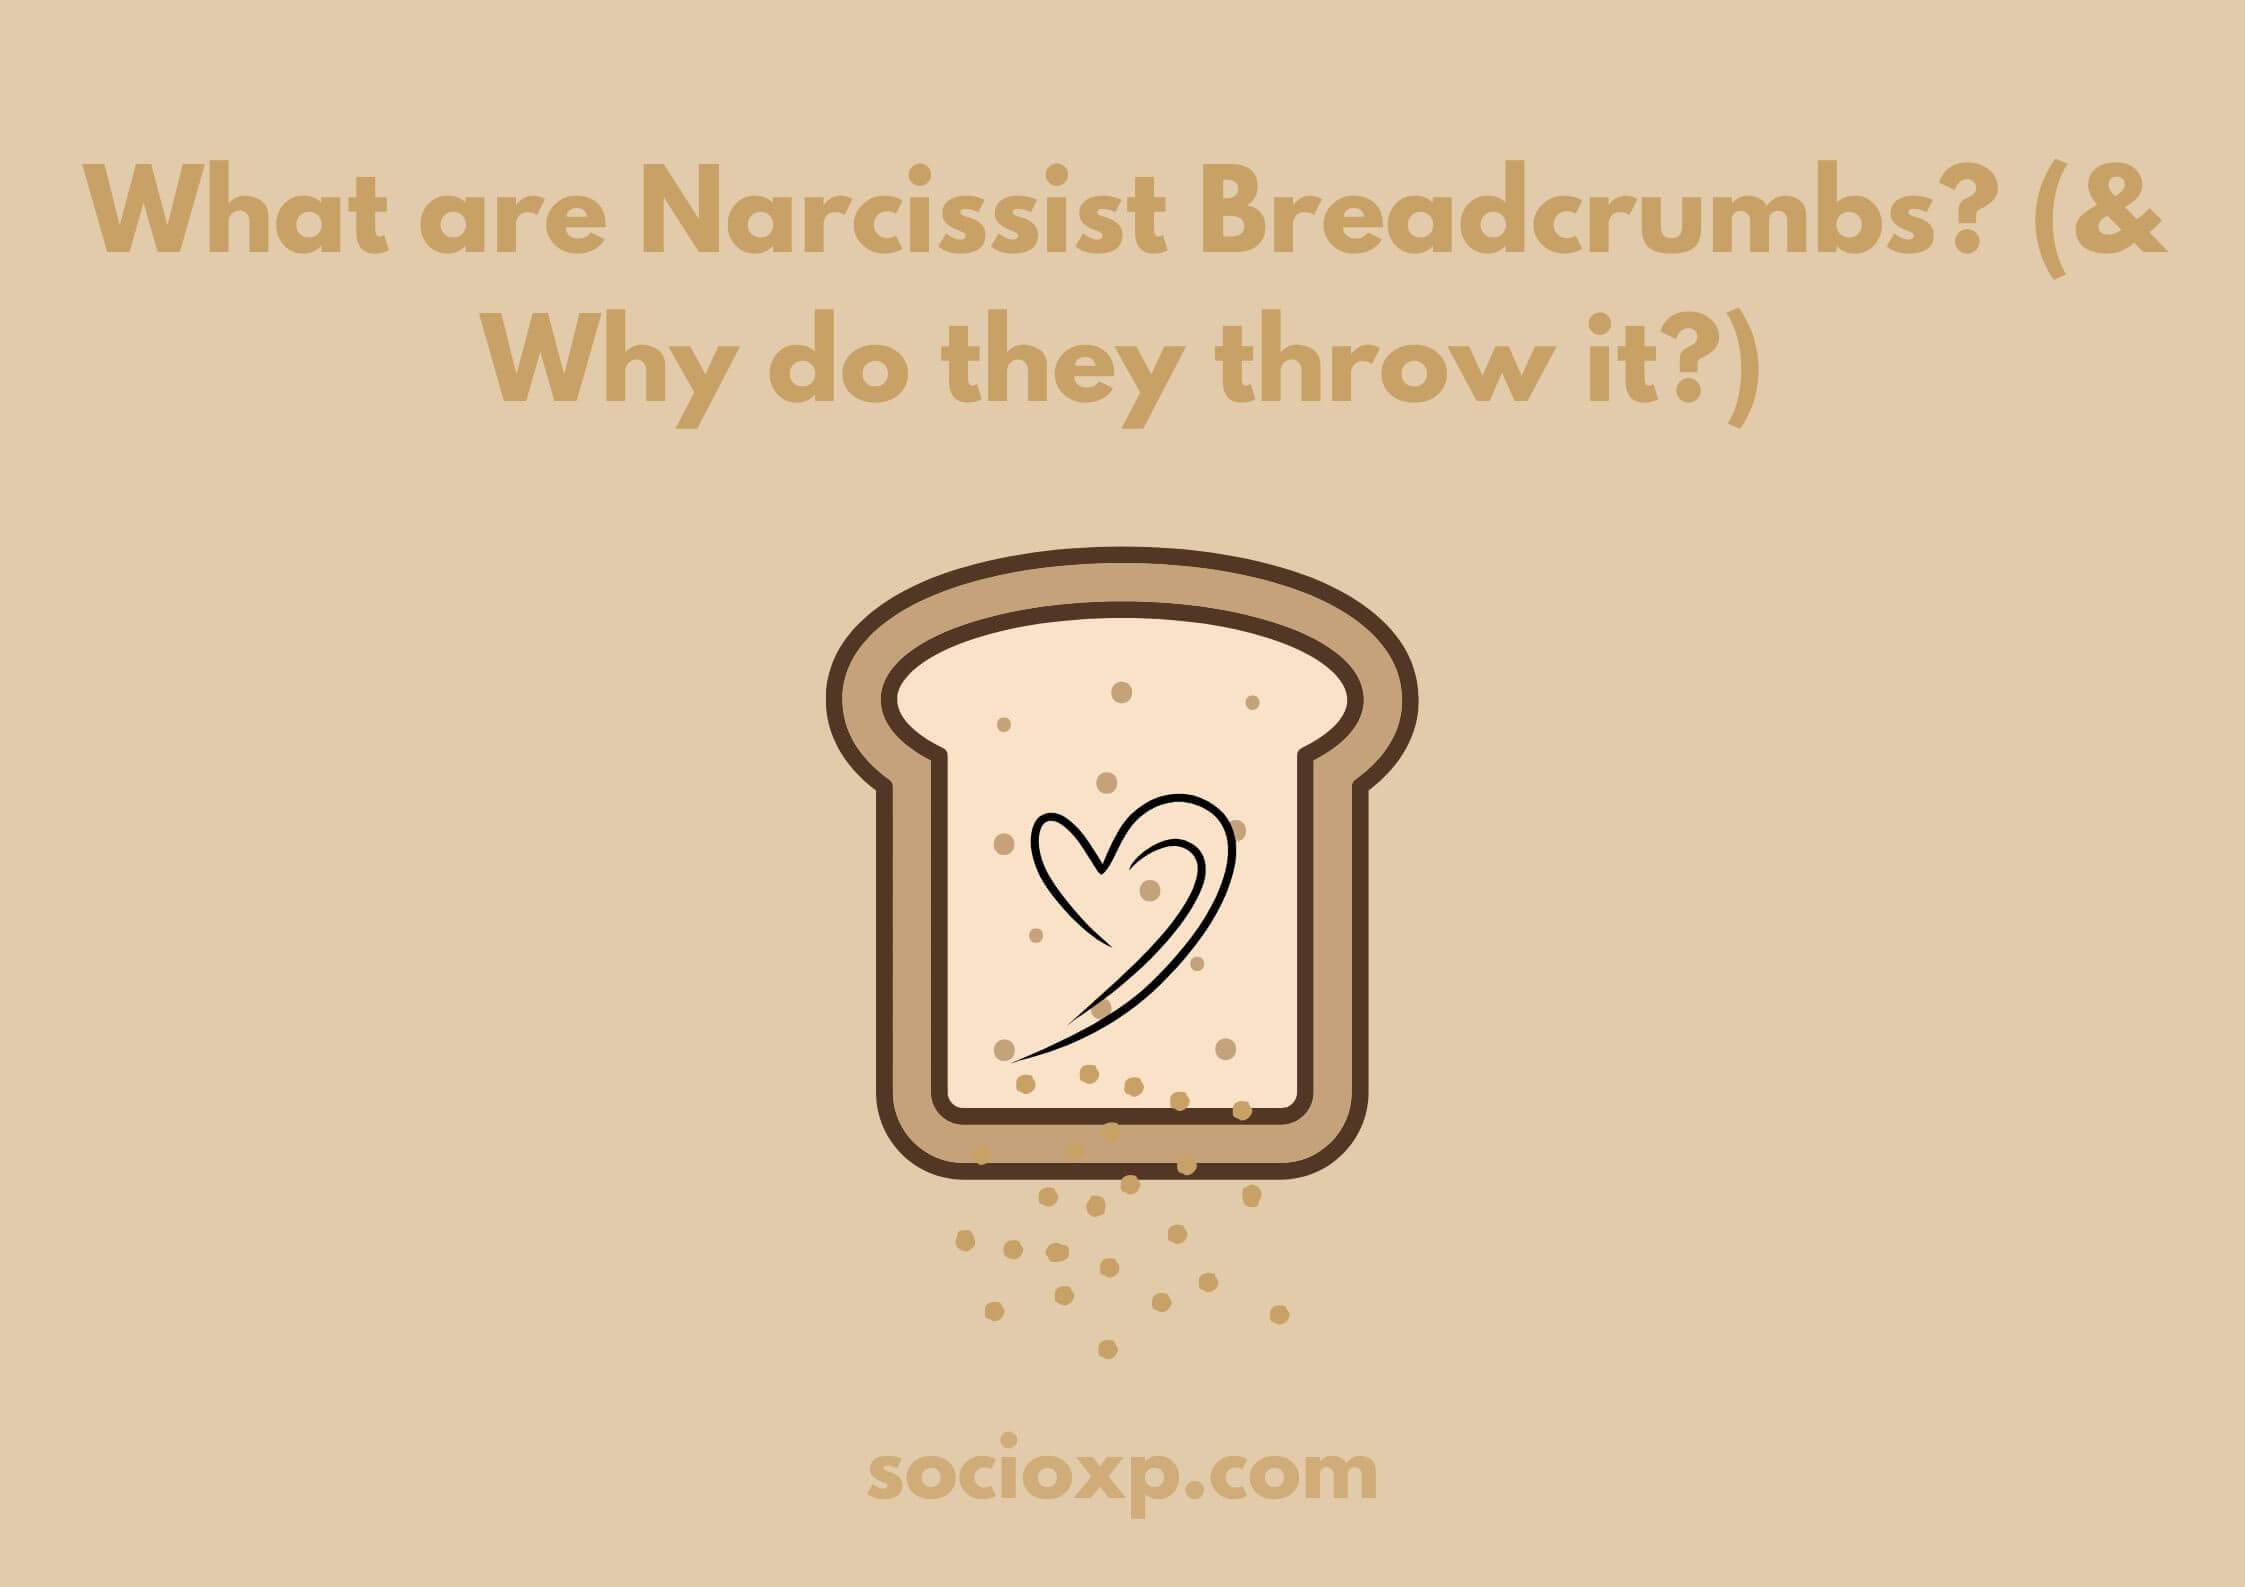 What are Narcissist Breadcrumbs? (& Why do they throw it?)